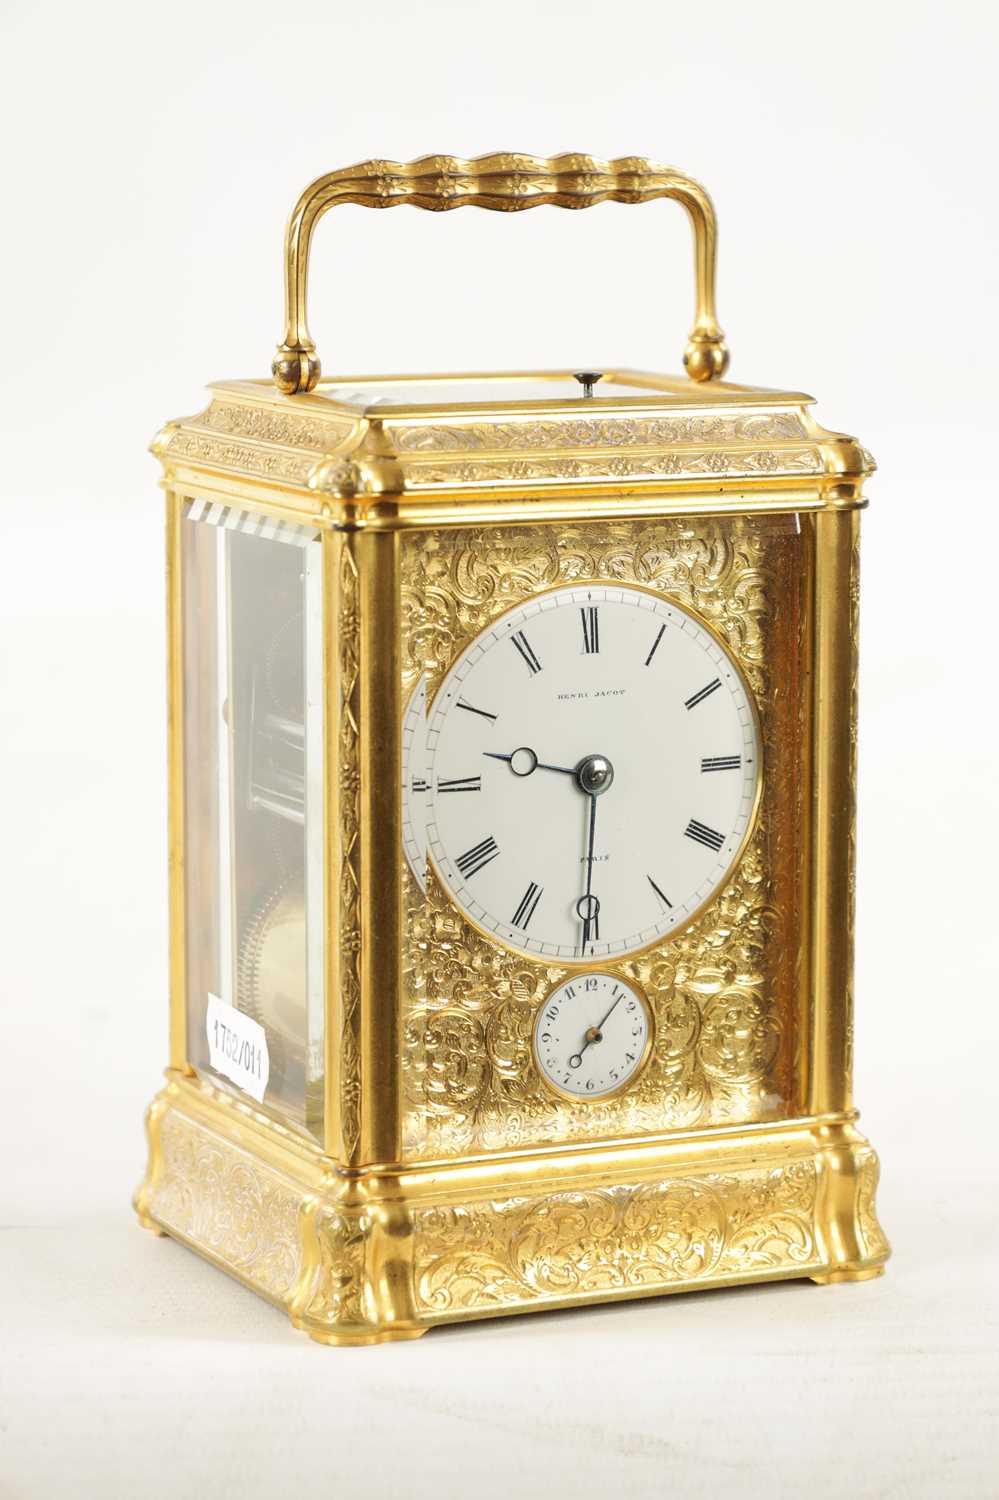 HENRI JACOT, PARIS. A LATE 19TH CENTURY FRENCH GRAND SONNERIE CARRIAGE CLOCK - Image 2 of 20